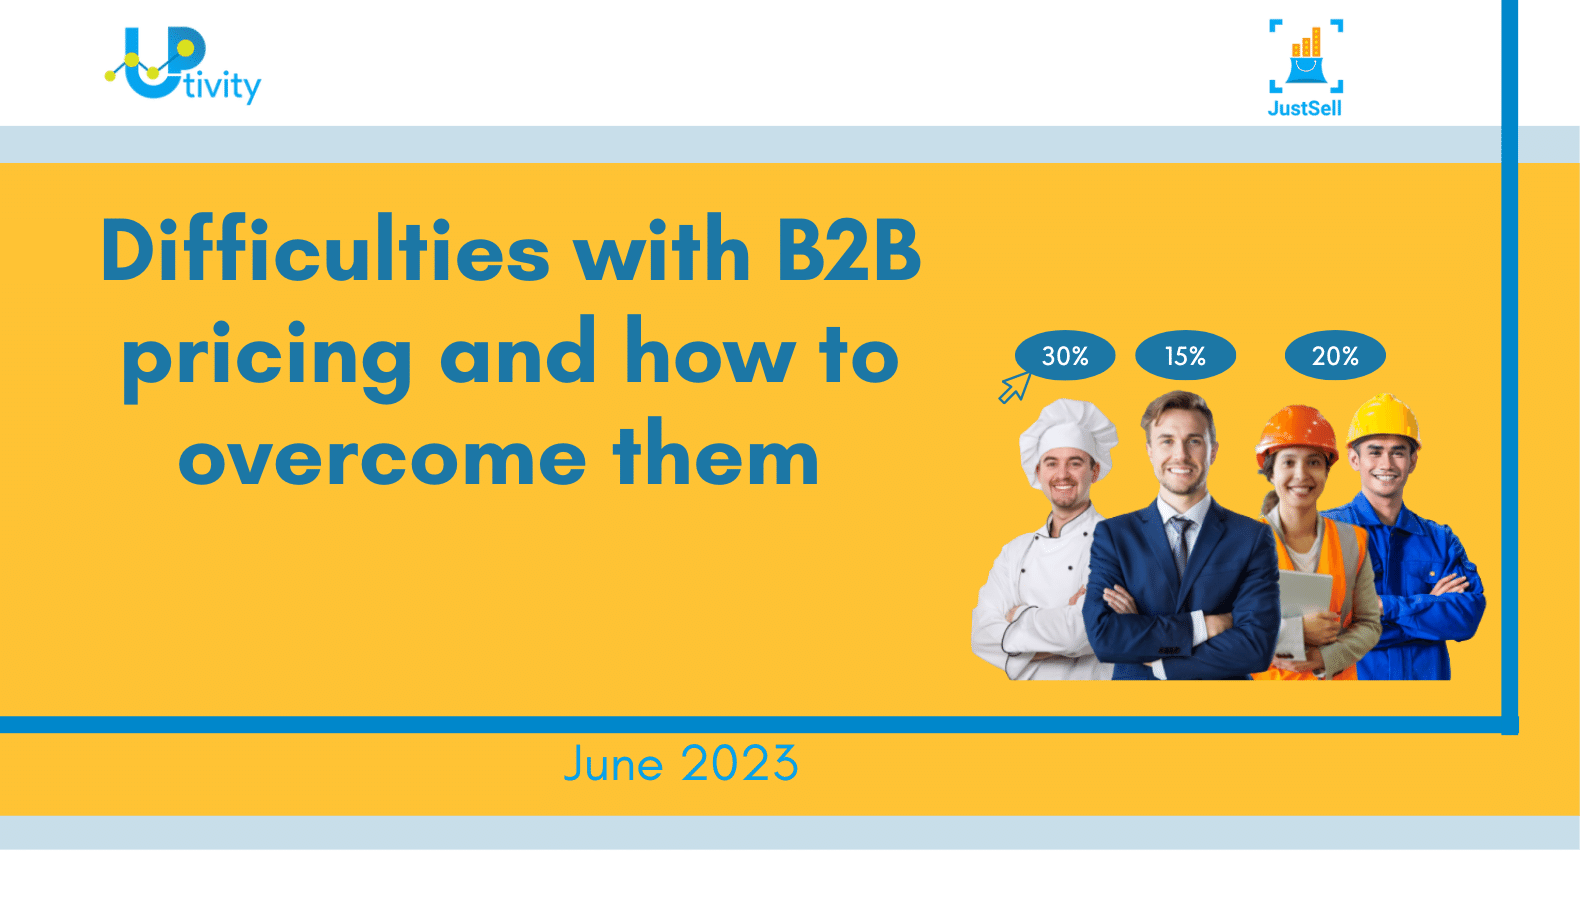 B2B pricing set against different customers